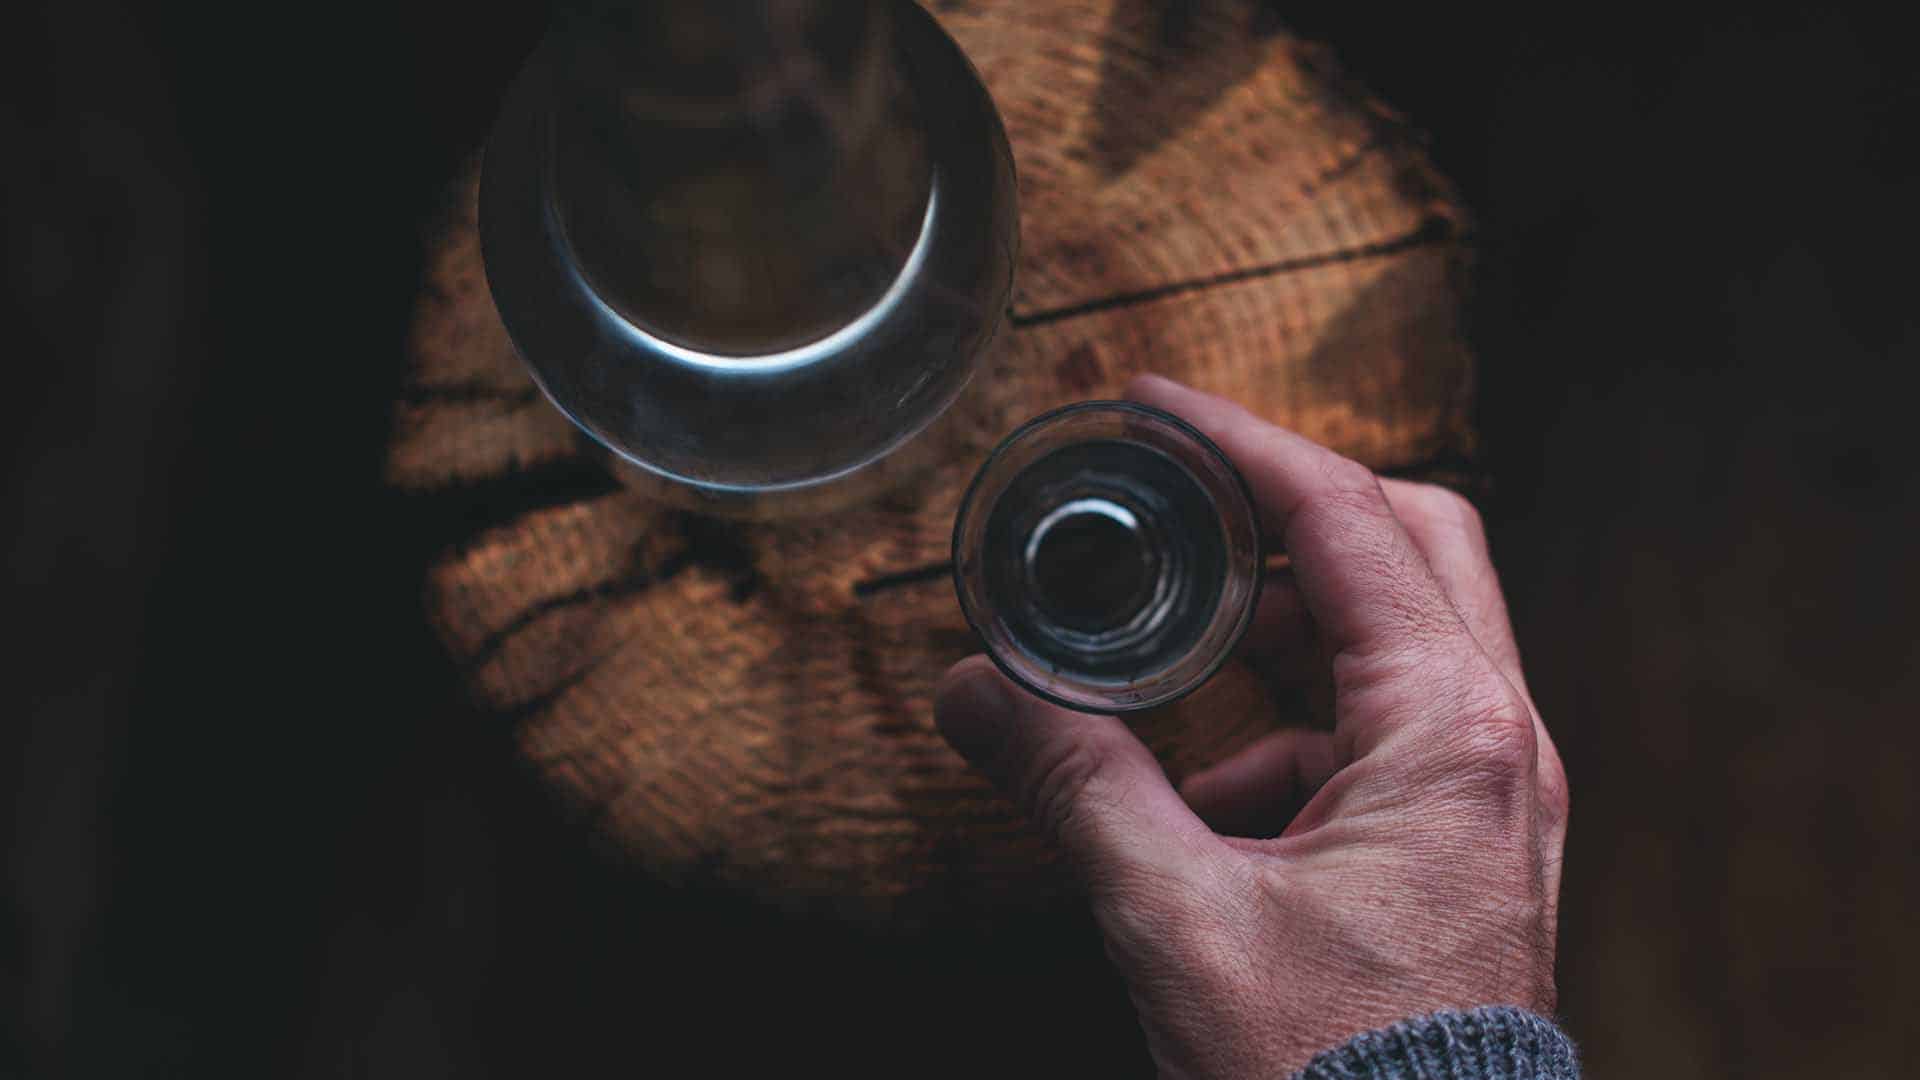 Man drinking strong alcohol drink from a shot glass, close up of hand, overhead view with selective focus